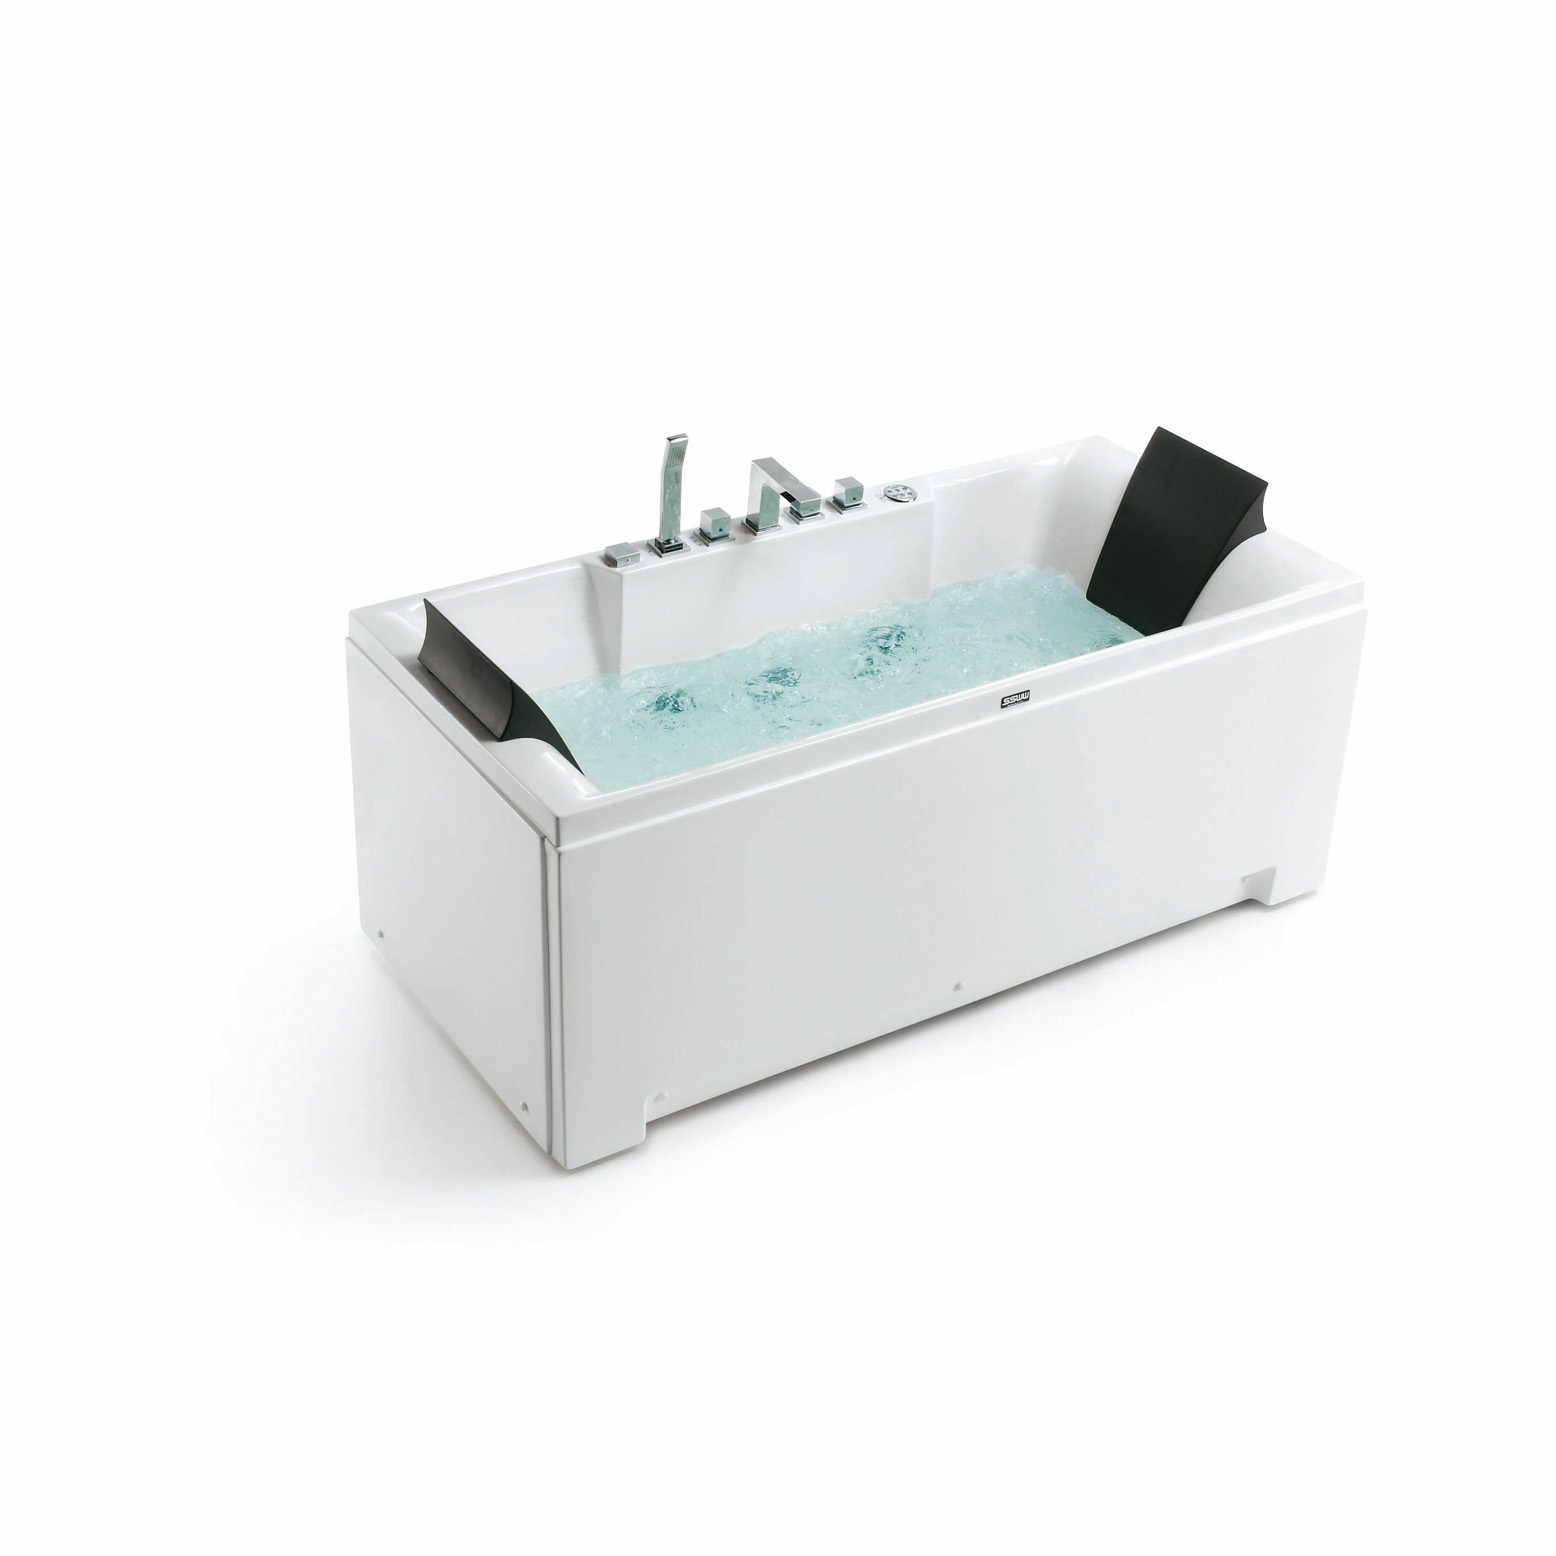 SSWW MASSAGE BATHTUB A808 FOR 2 PERSONS 1710×810MM Featured Image